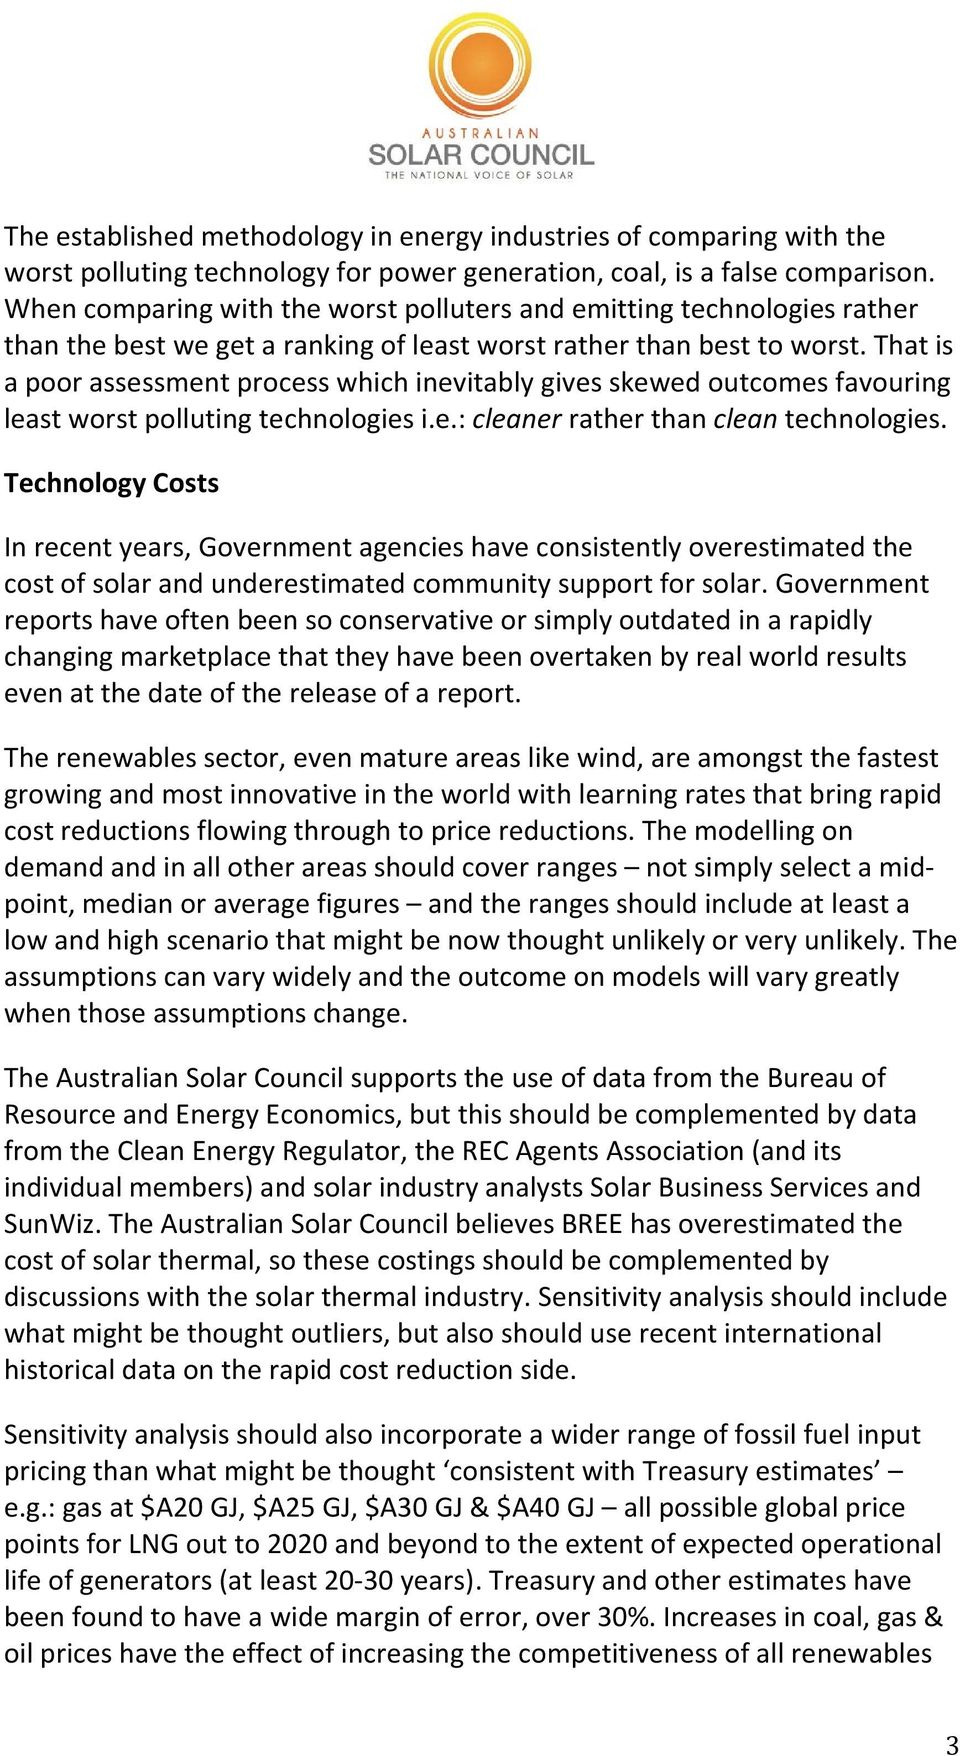 That is a poor assessment process which inevitably gives skewed outcomes favouring least worst polluting technologies i.e.: cleaner rather than clean technologies.